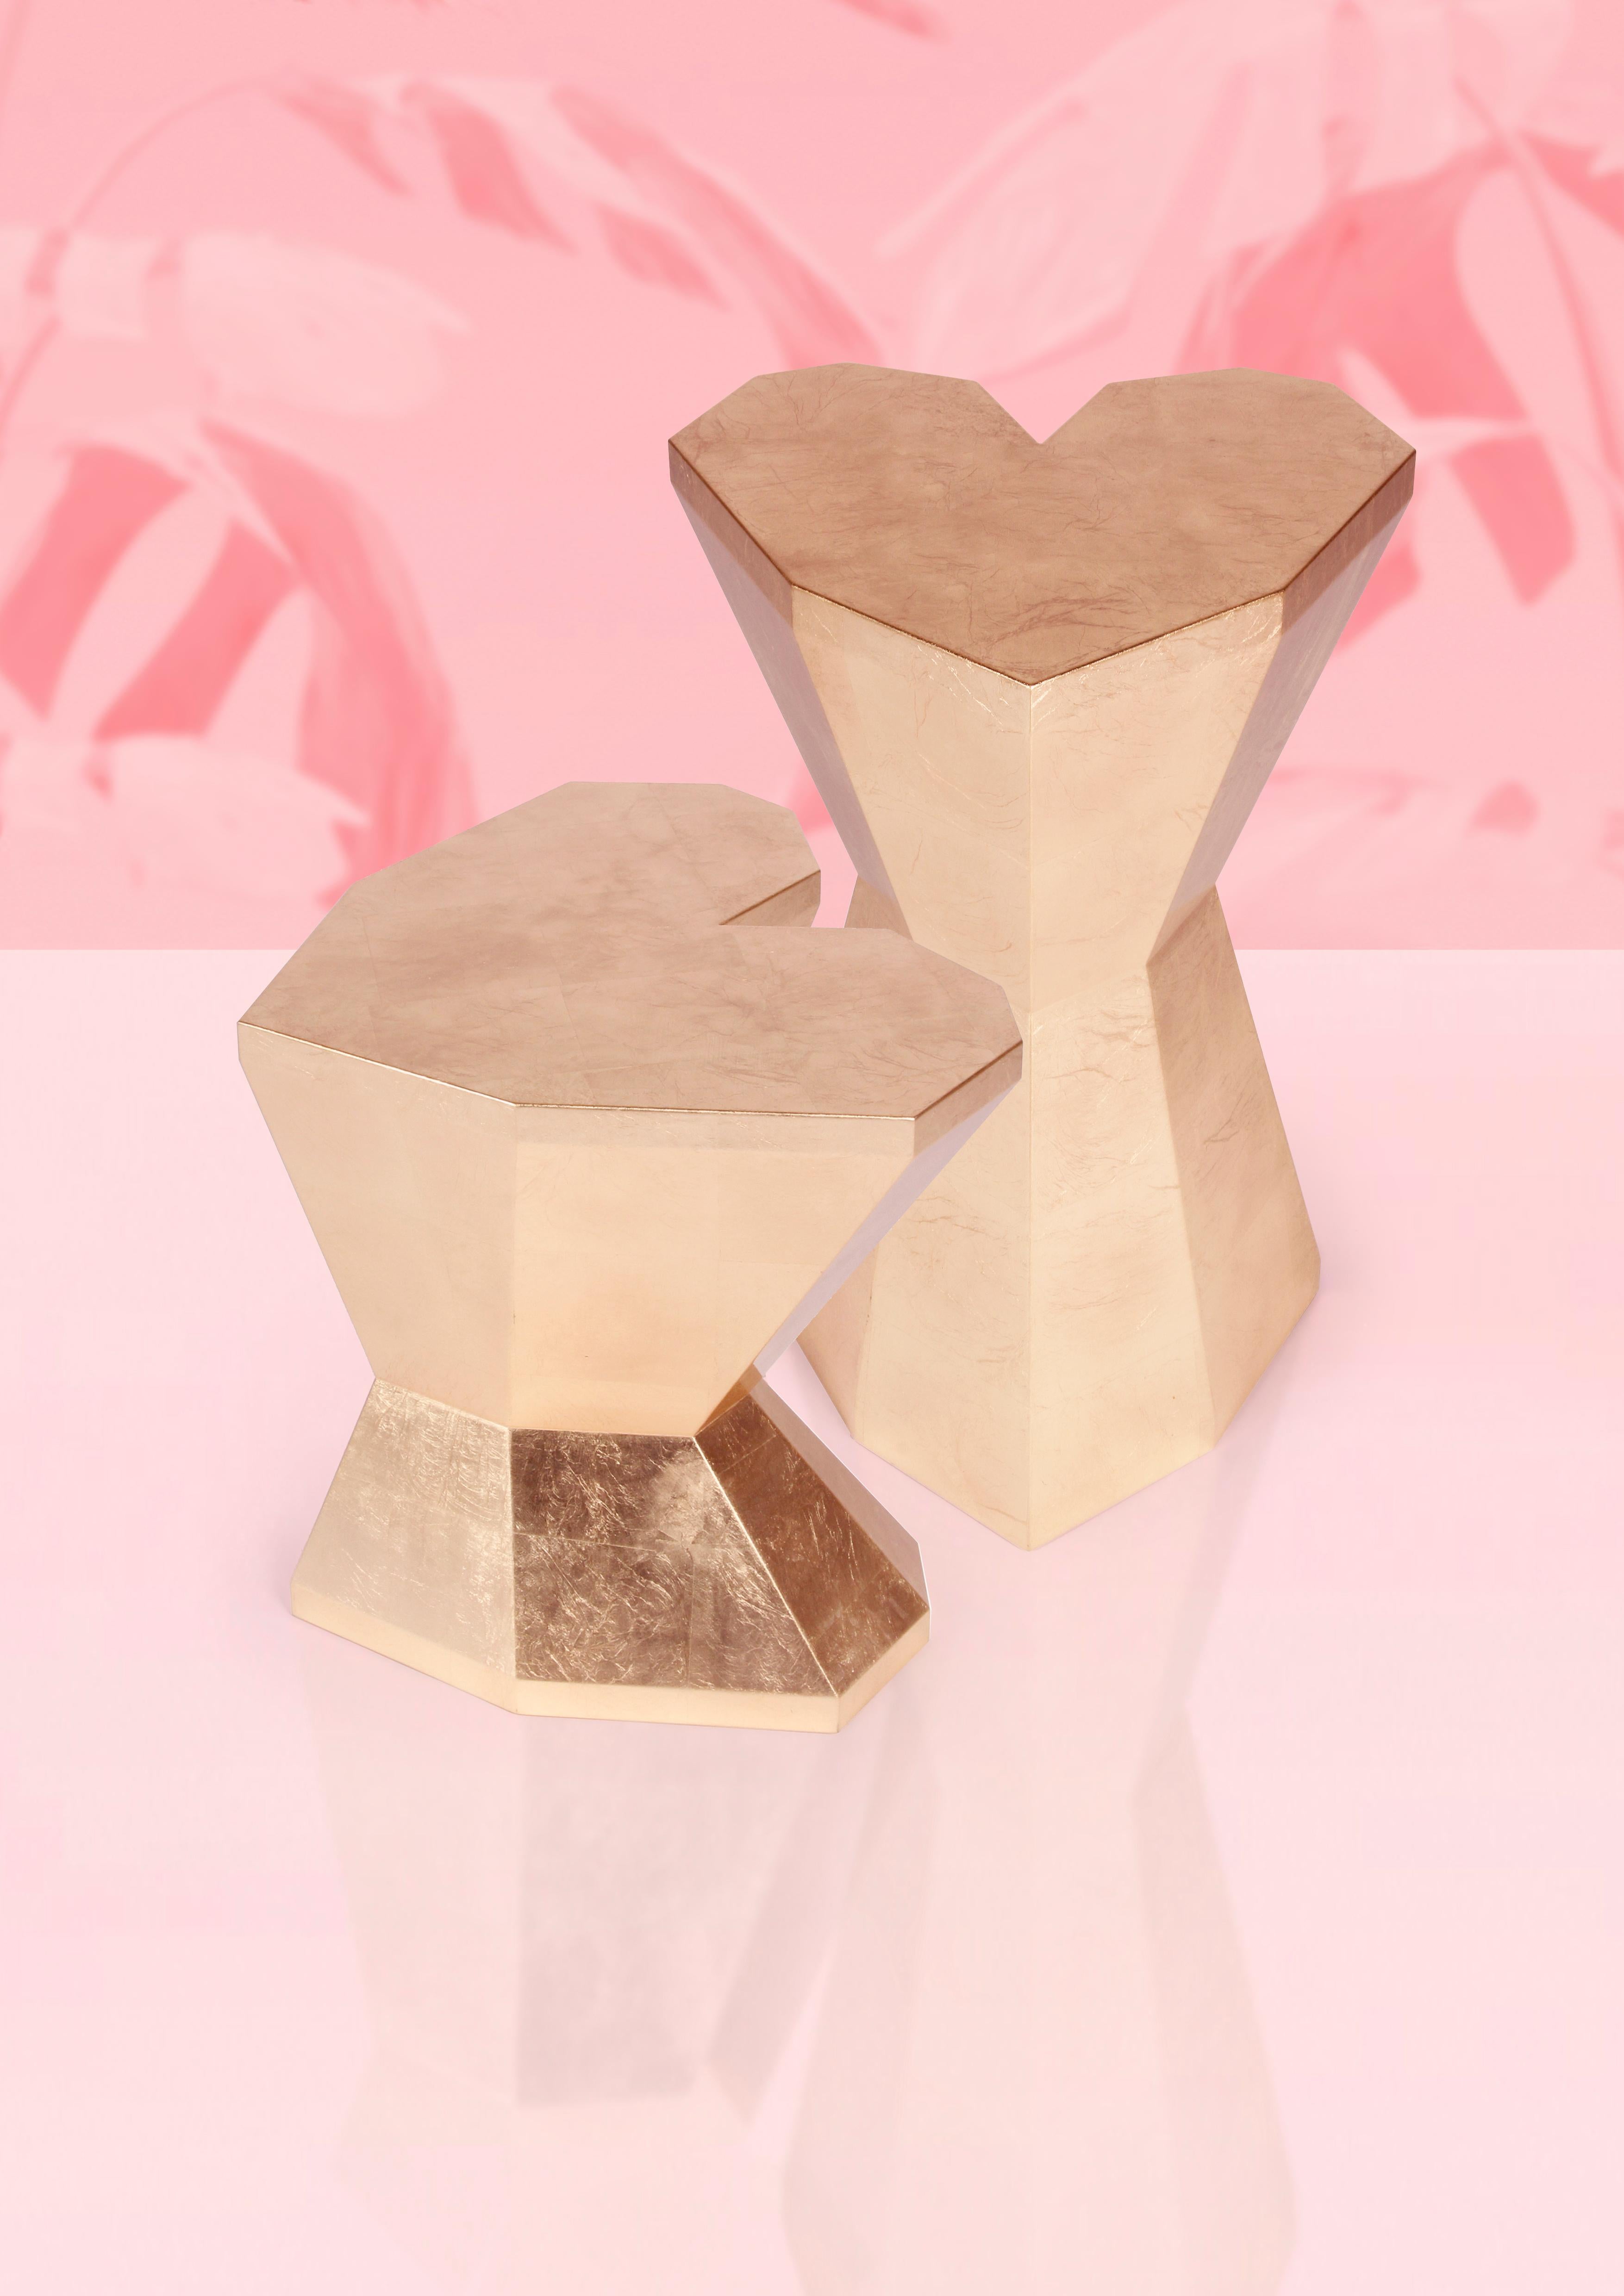 Pair of Queen heart side tables by Royal Stranger
Dimensions:
Tall: Width 45 x 65 x 47 cm
Short: 50 x 60 x 62 cm
Materials: Glossy varnish on the gold leafed wood structure.

This Royal and romantic pair of side tables makes you wander to